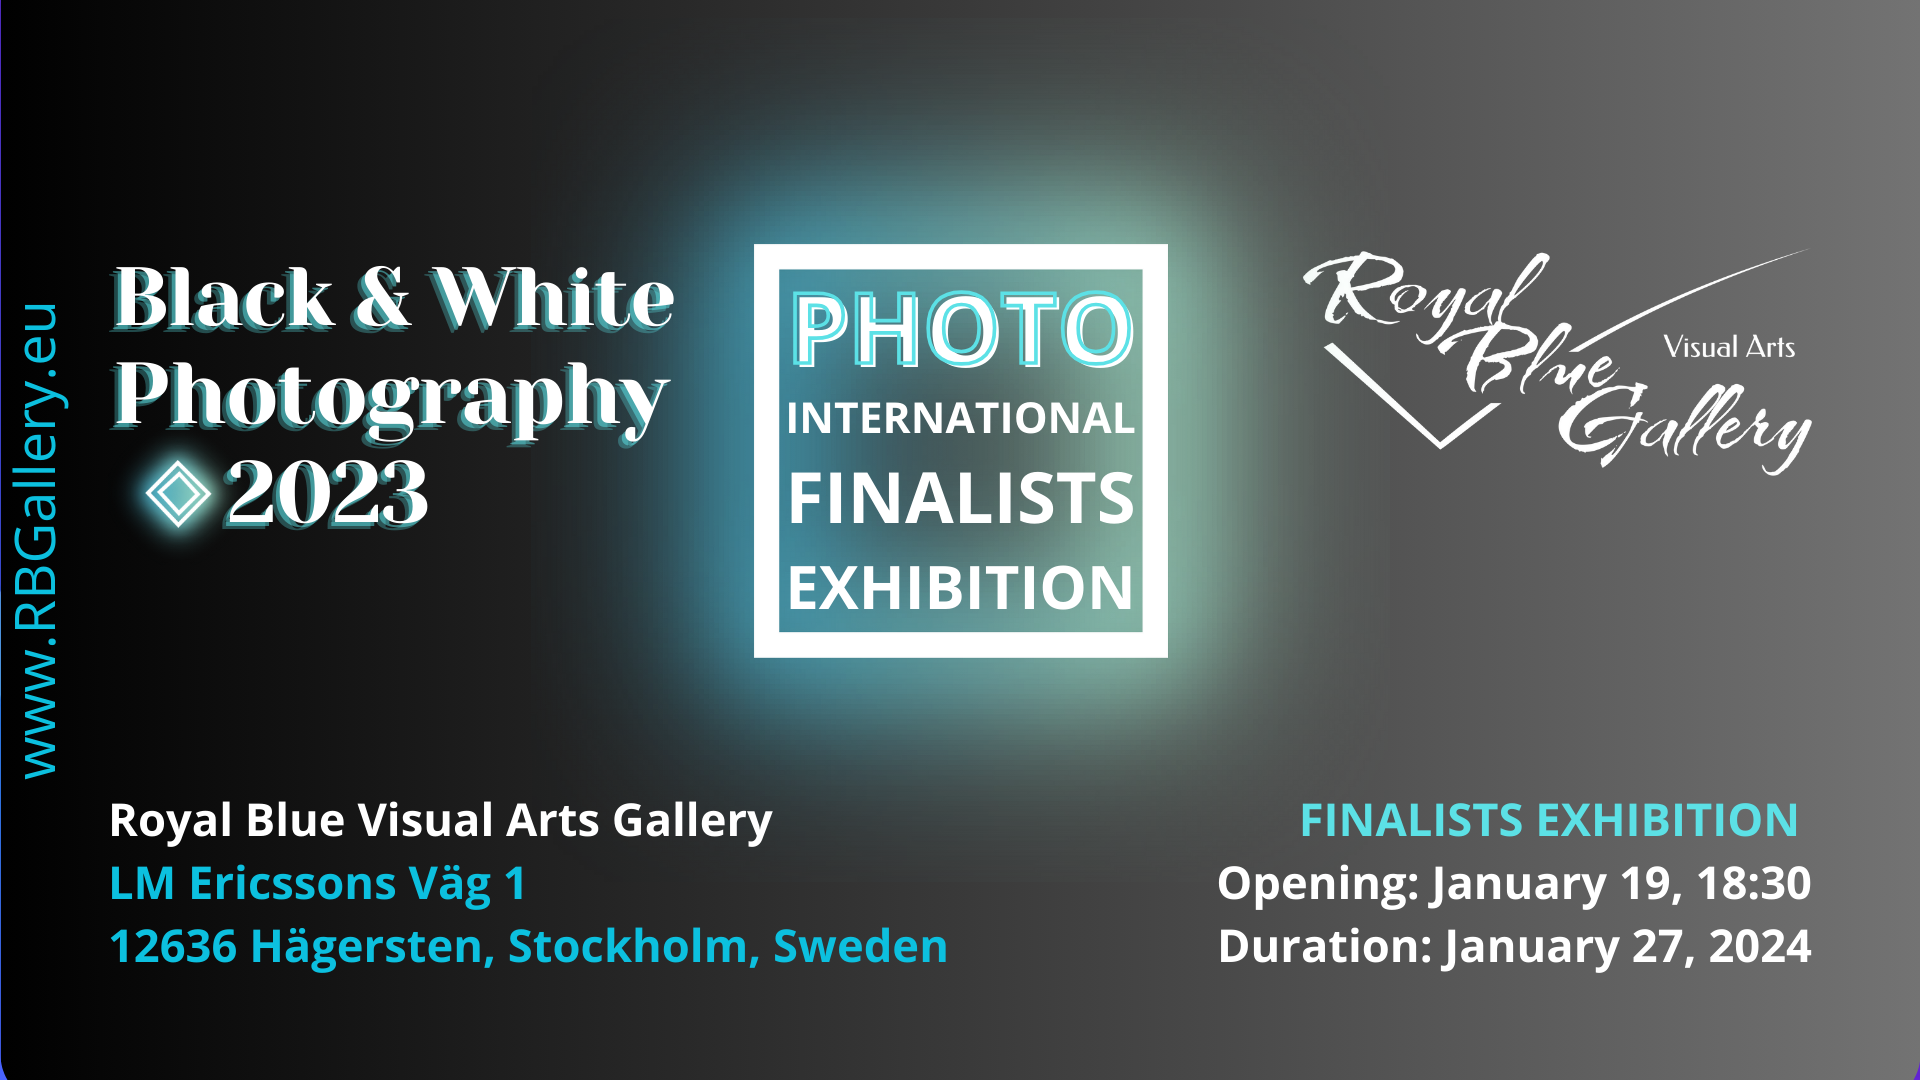 Black & White Photography 2023 – Exhibition of Open Call Finalists